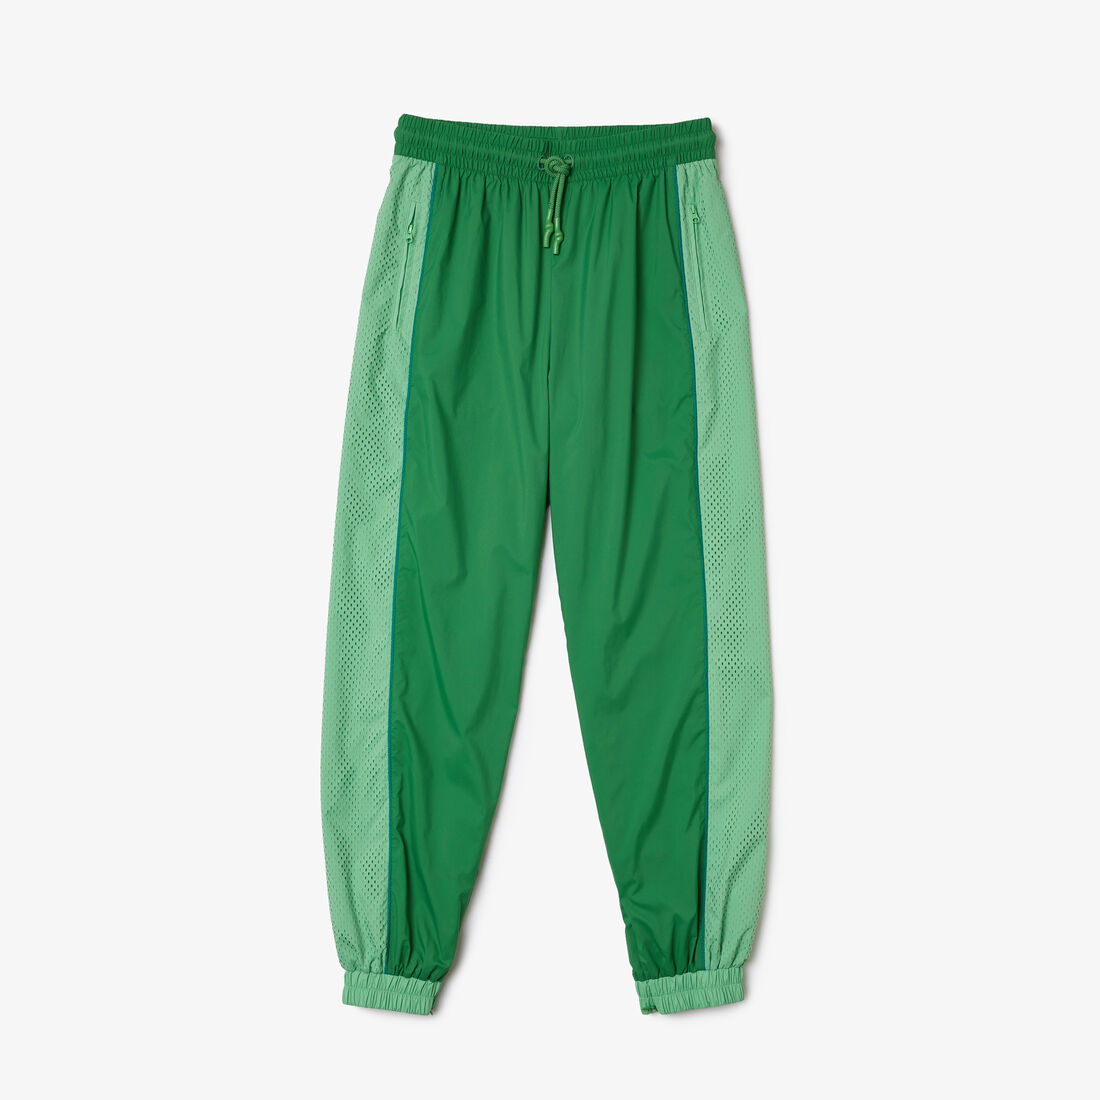 Women's Lacoste Perforated Effect Track Pants